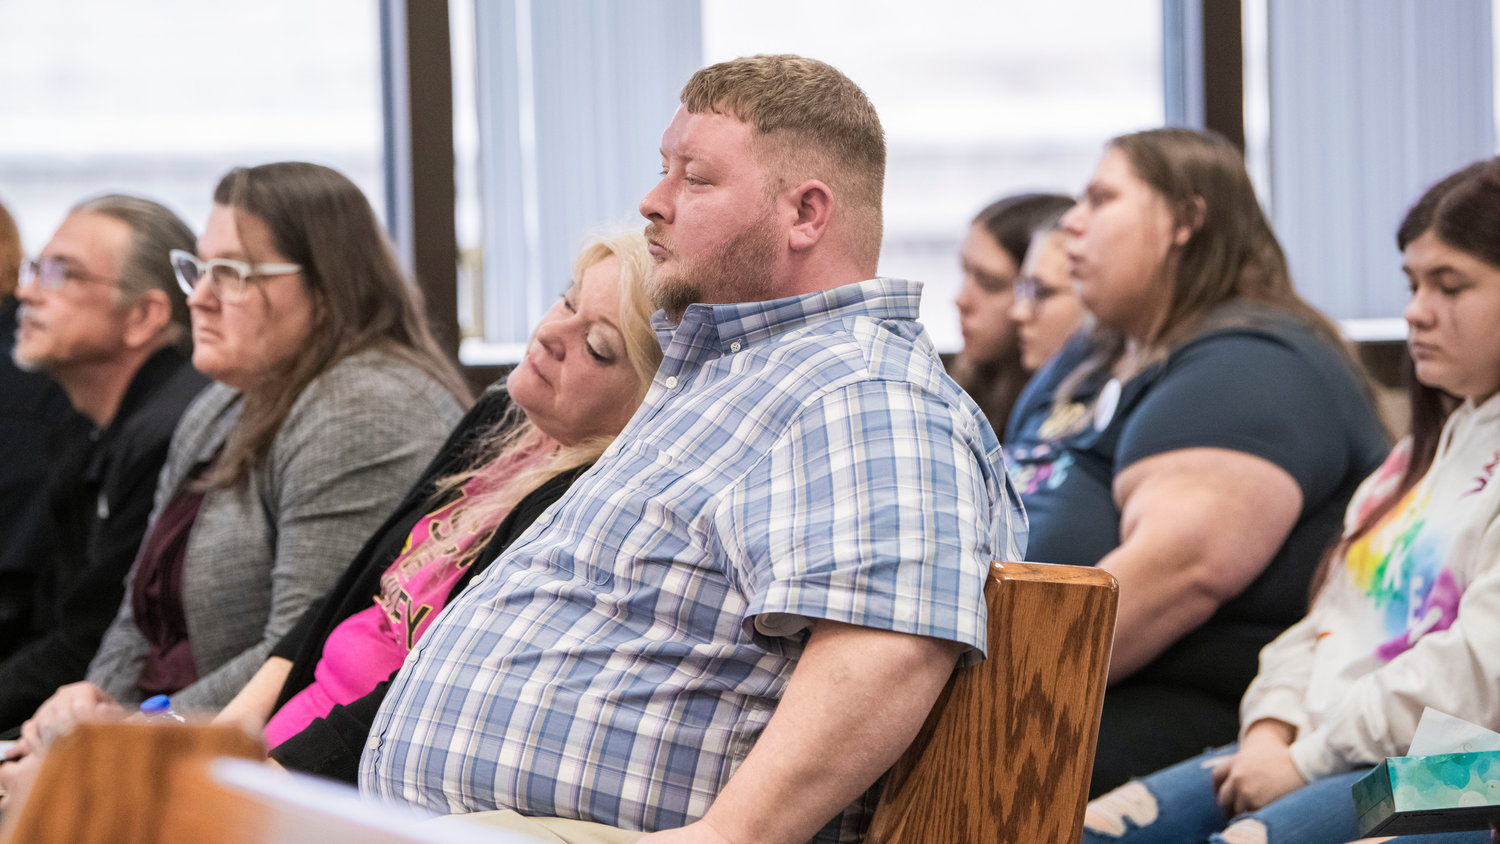 Joseph Outumuro attends a sentencing hearing for Cristopher Allen Gaudreau, after making a victim impact statement, in Lewis County Superior Court Wednesday morning in Chehalis.